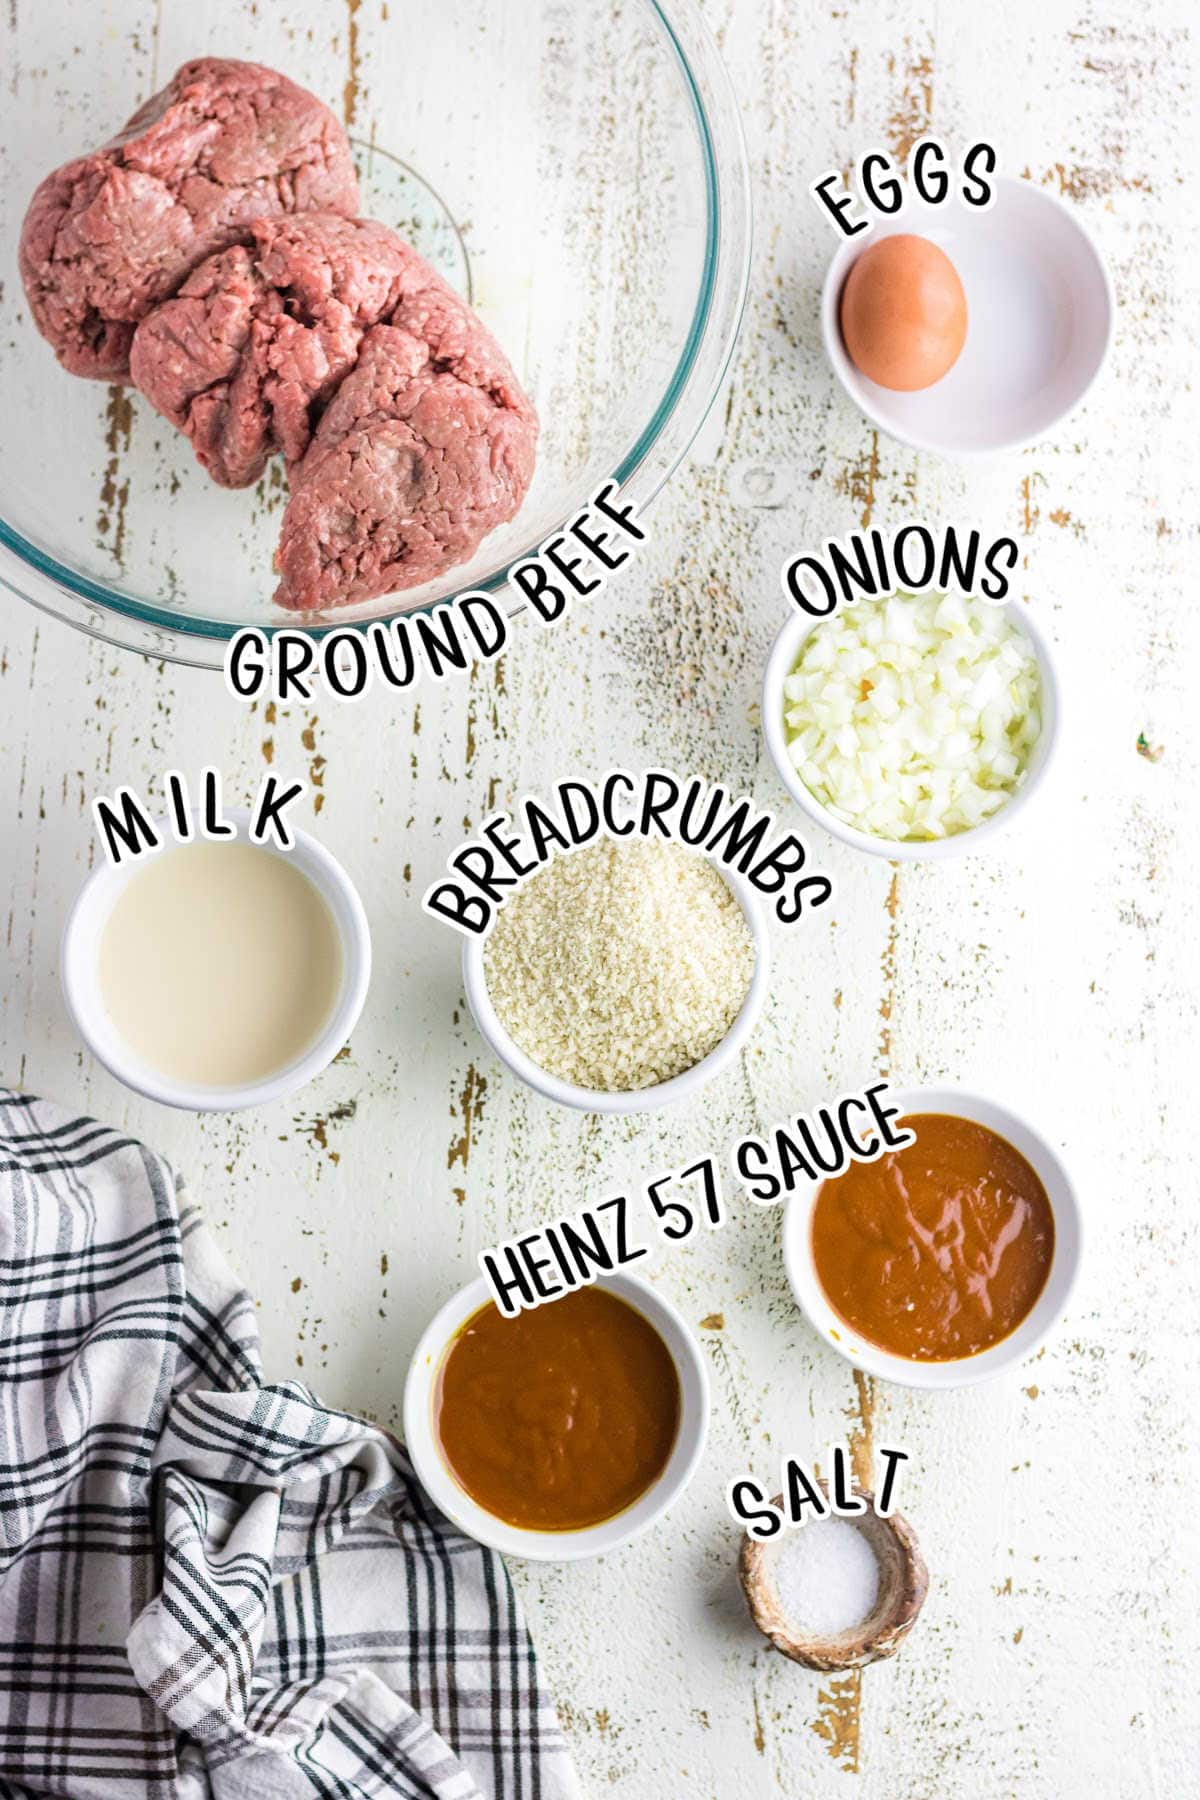 Labeled ingredients for this meatloaf recipe.